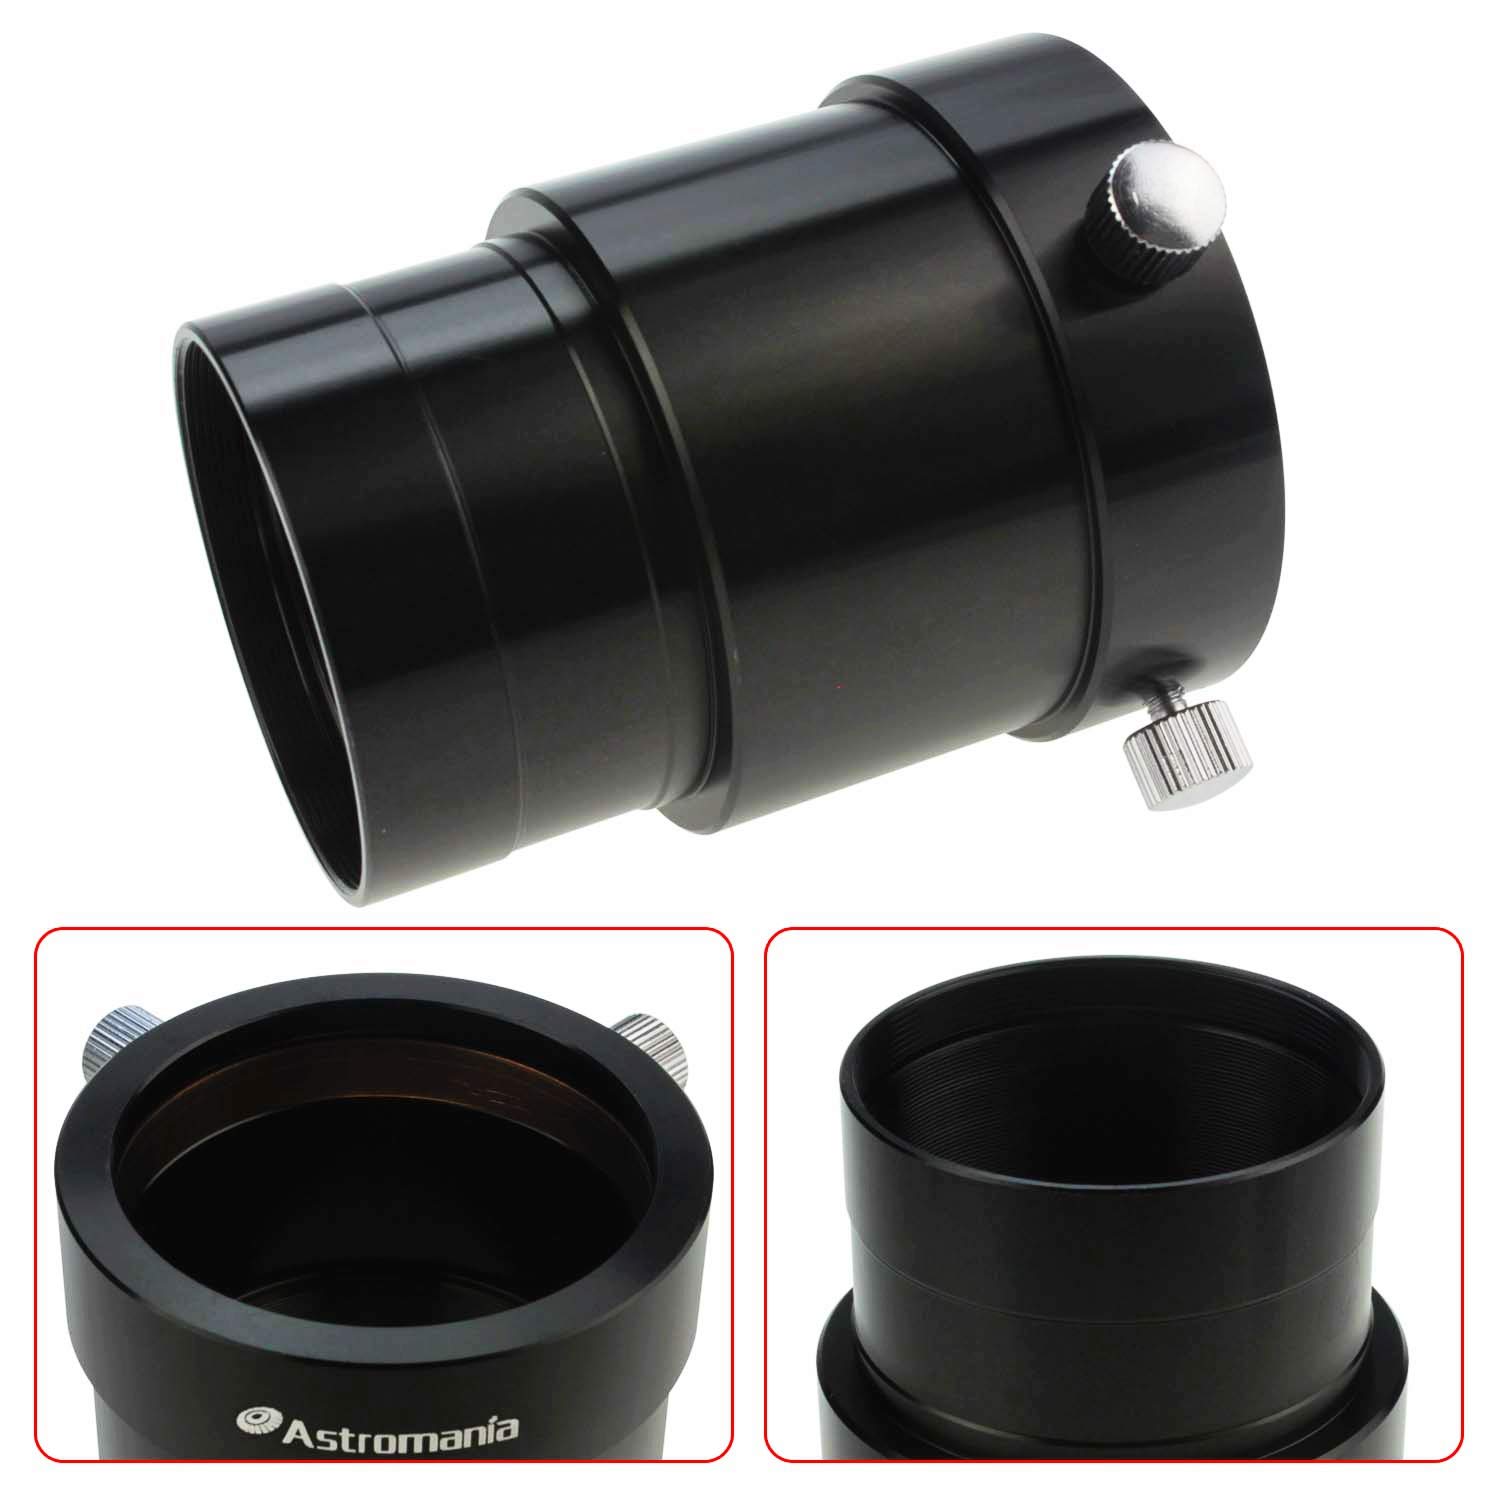 Astromania 2-Inch Telescope Eyepiece Extension Tube Adapter - Optical 50mm Threaded Tube Telescope Parts